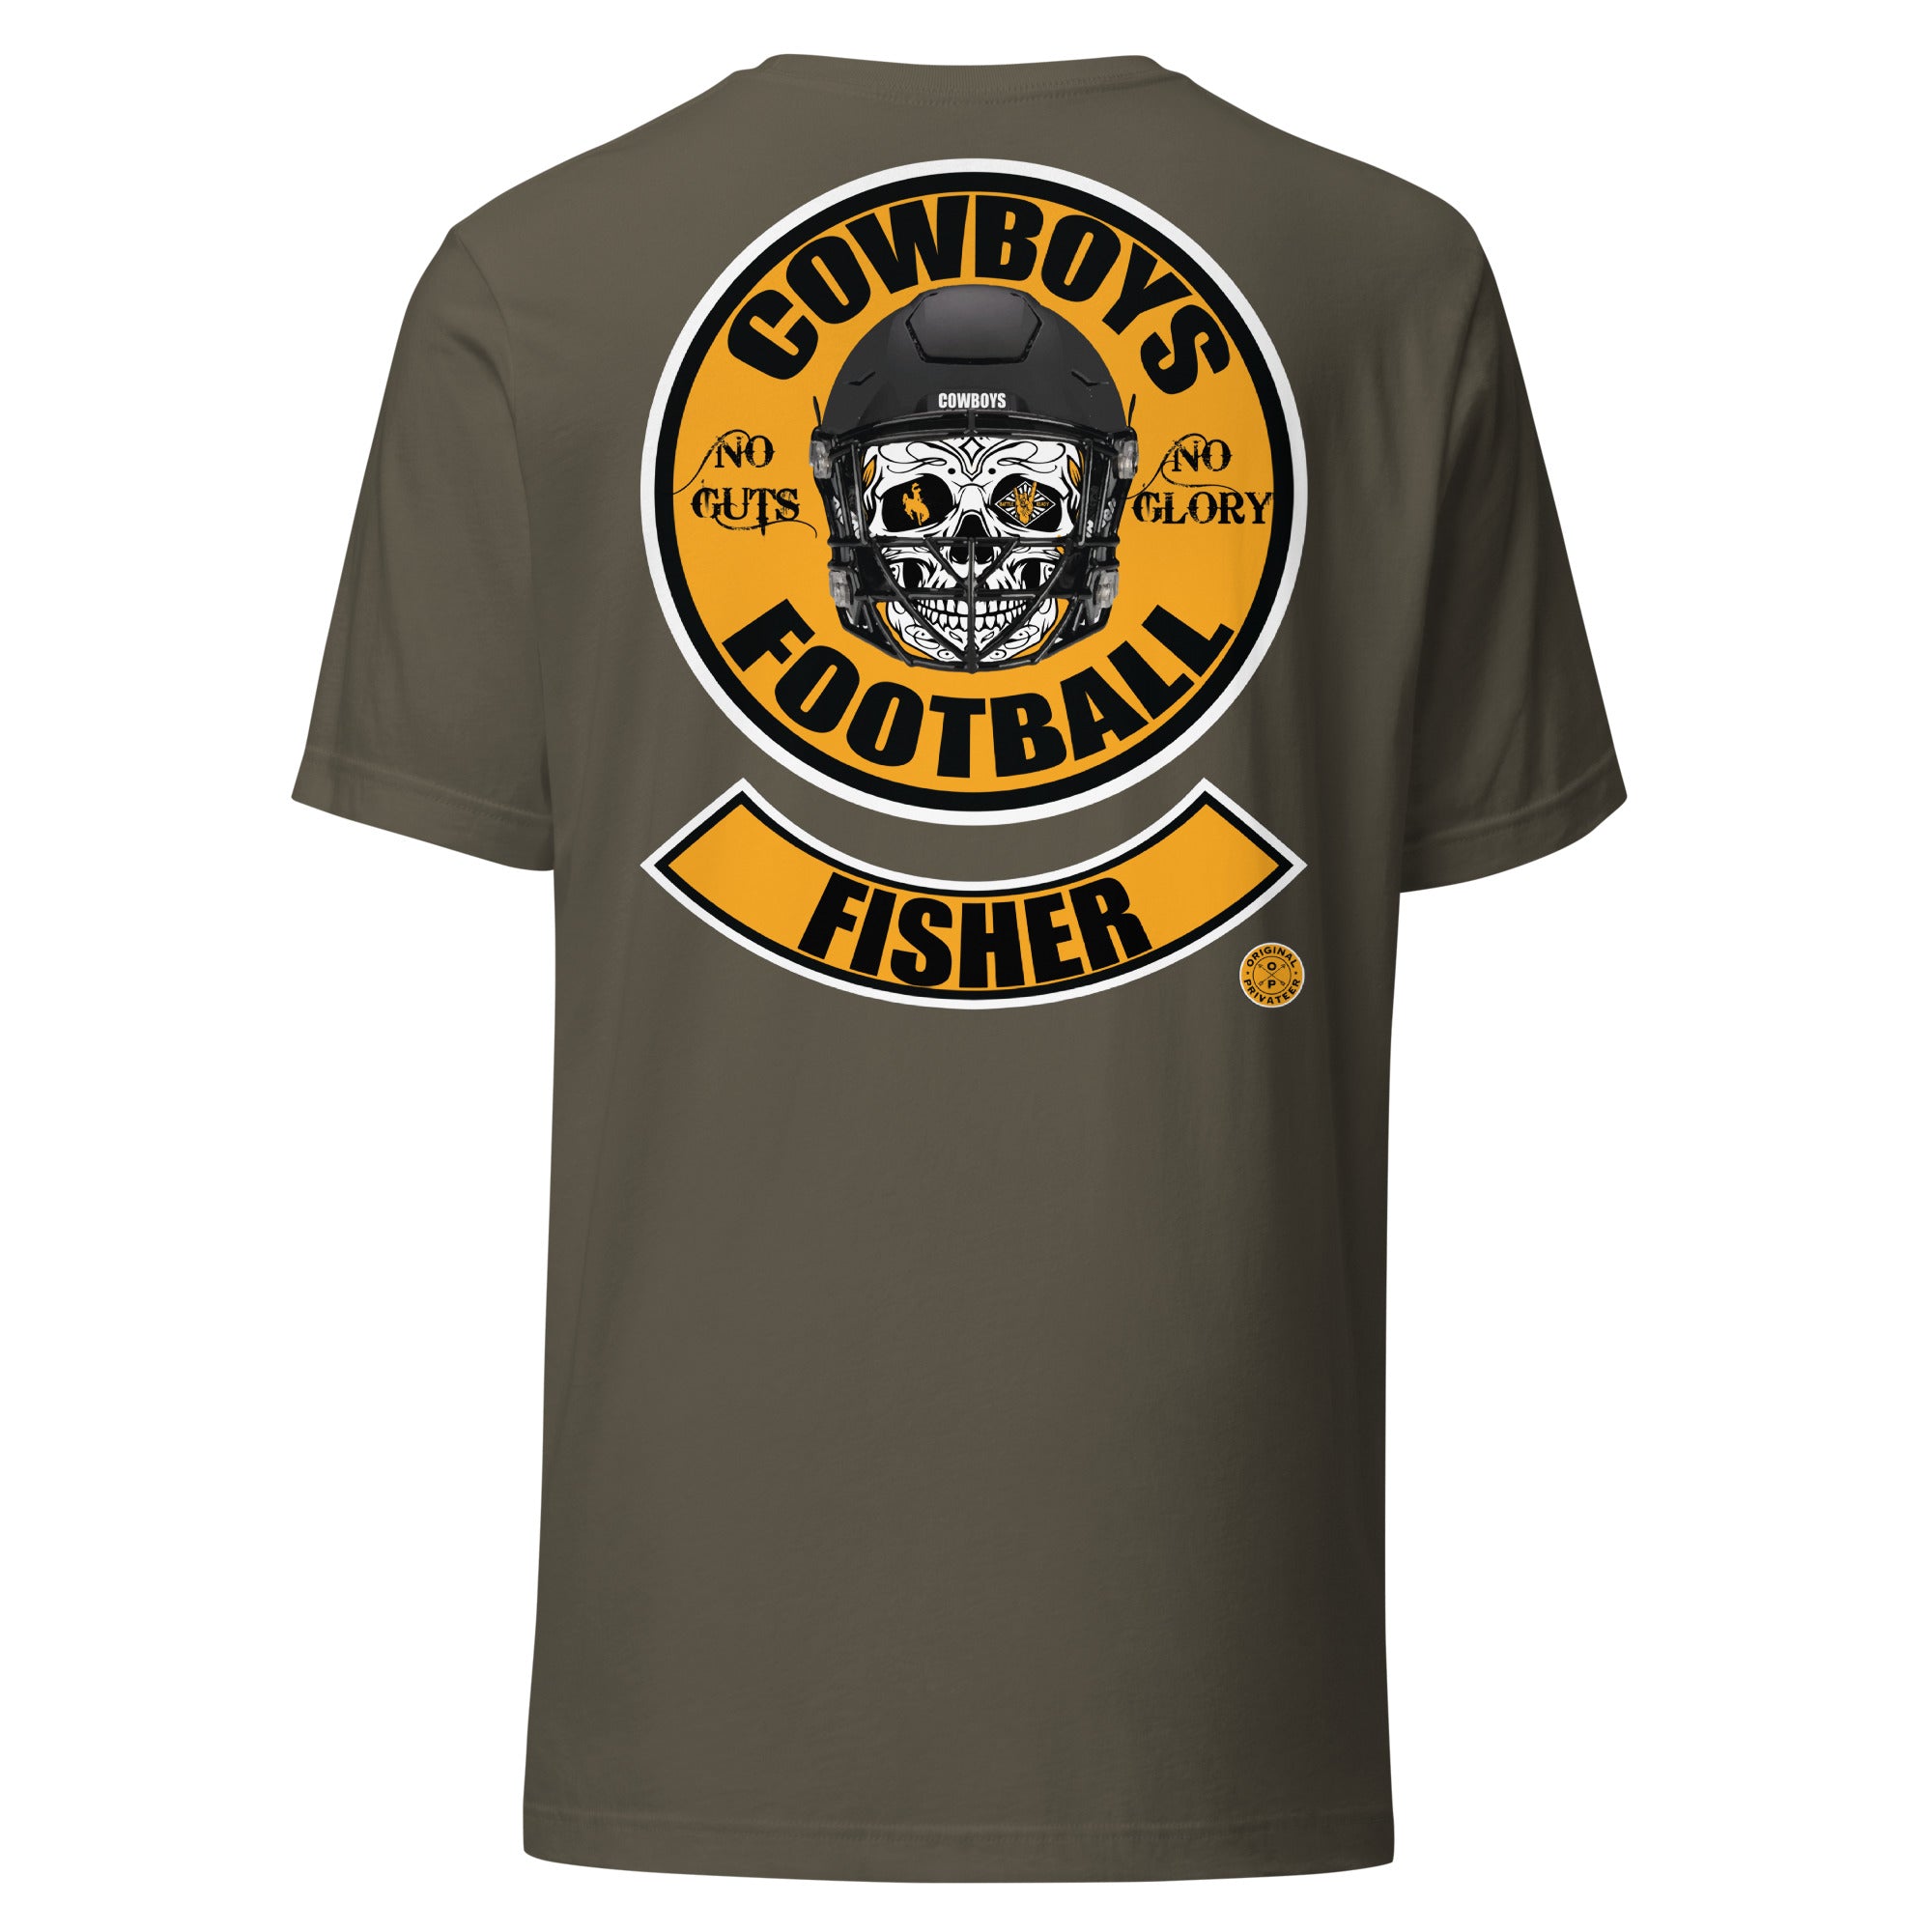 GHS Cowboys Football Small Number 2023 v4 up to 5X Premium Unisex t-shirt